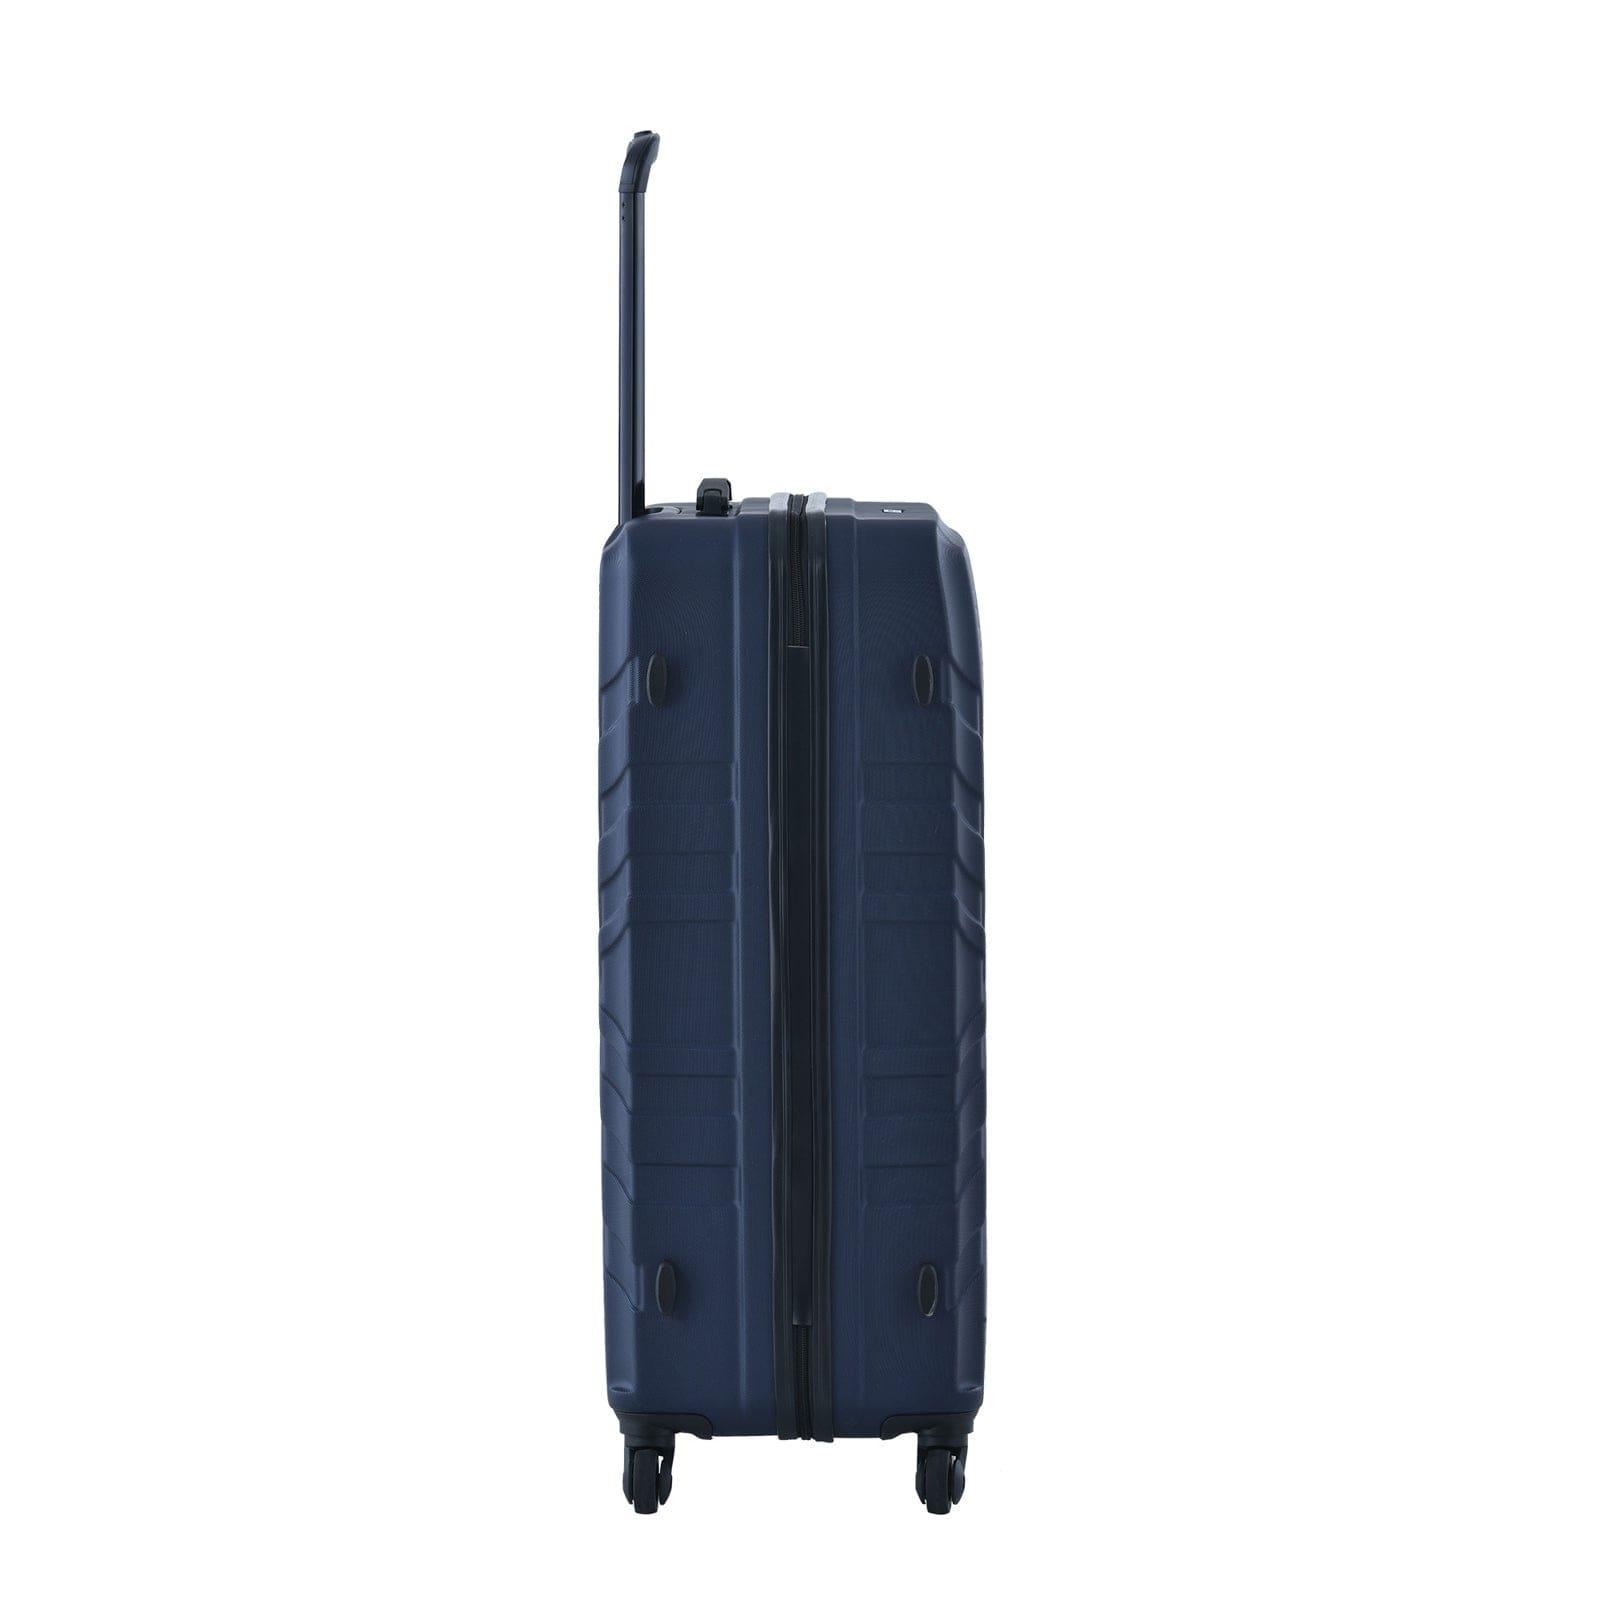 Shop 3 Piece Luggage Sets ABS Lightweight Suitcase with Two Hooks, Spinner Wheels, TSA Lock, (20/24/28) Navy Mademoiselle Home Decor